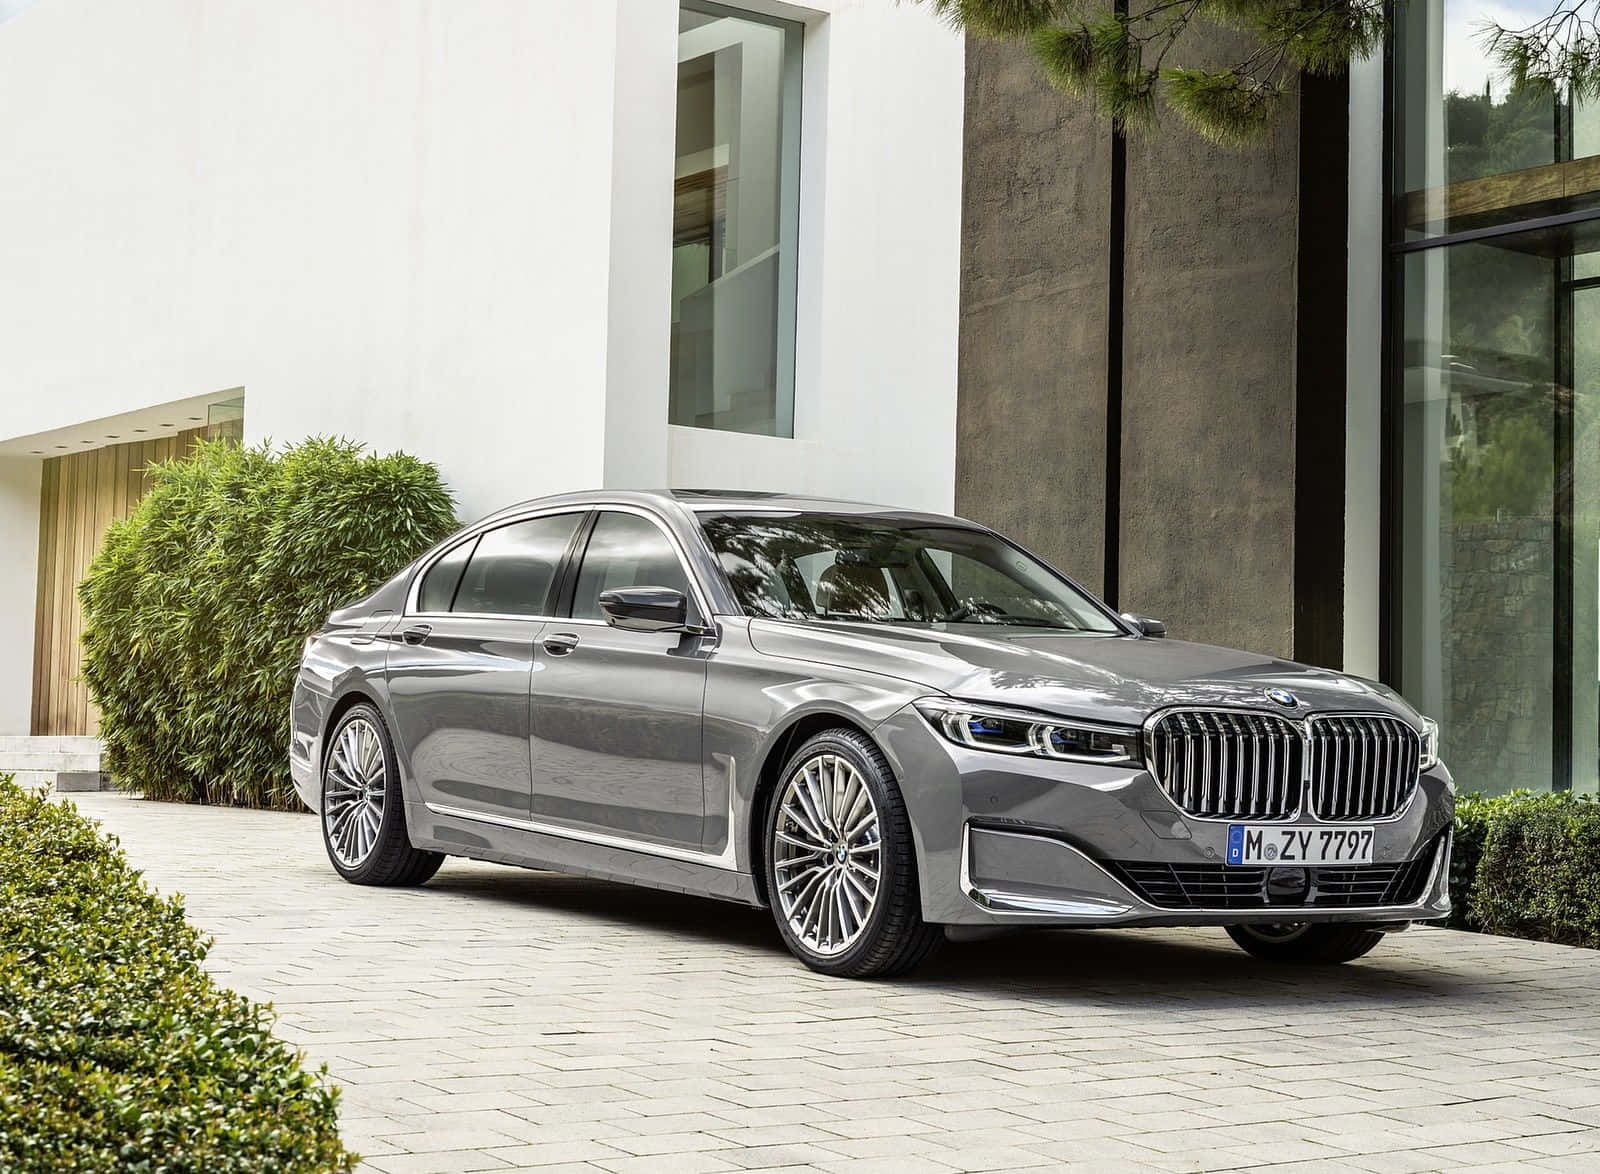 The Elegant BMW 7 Series in Action Wallpaper